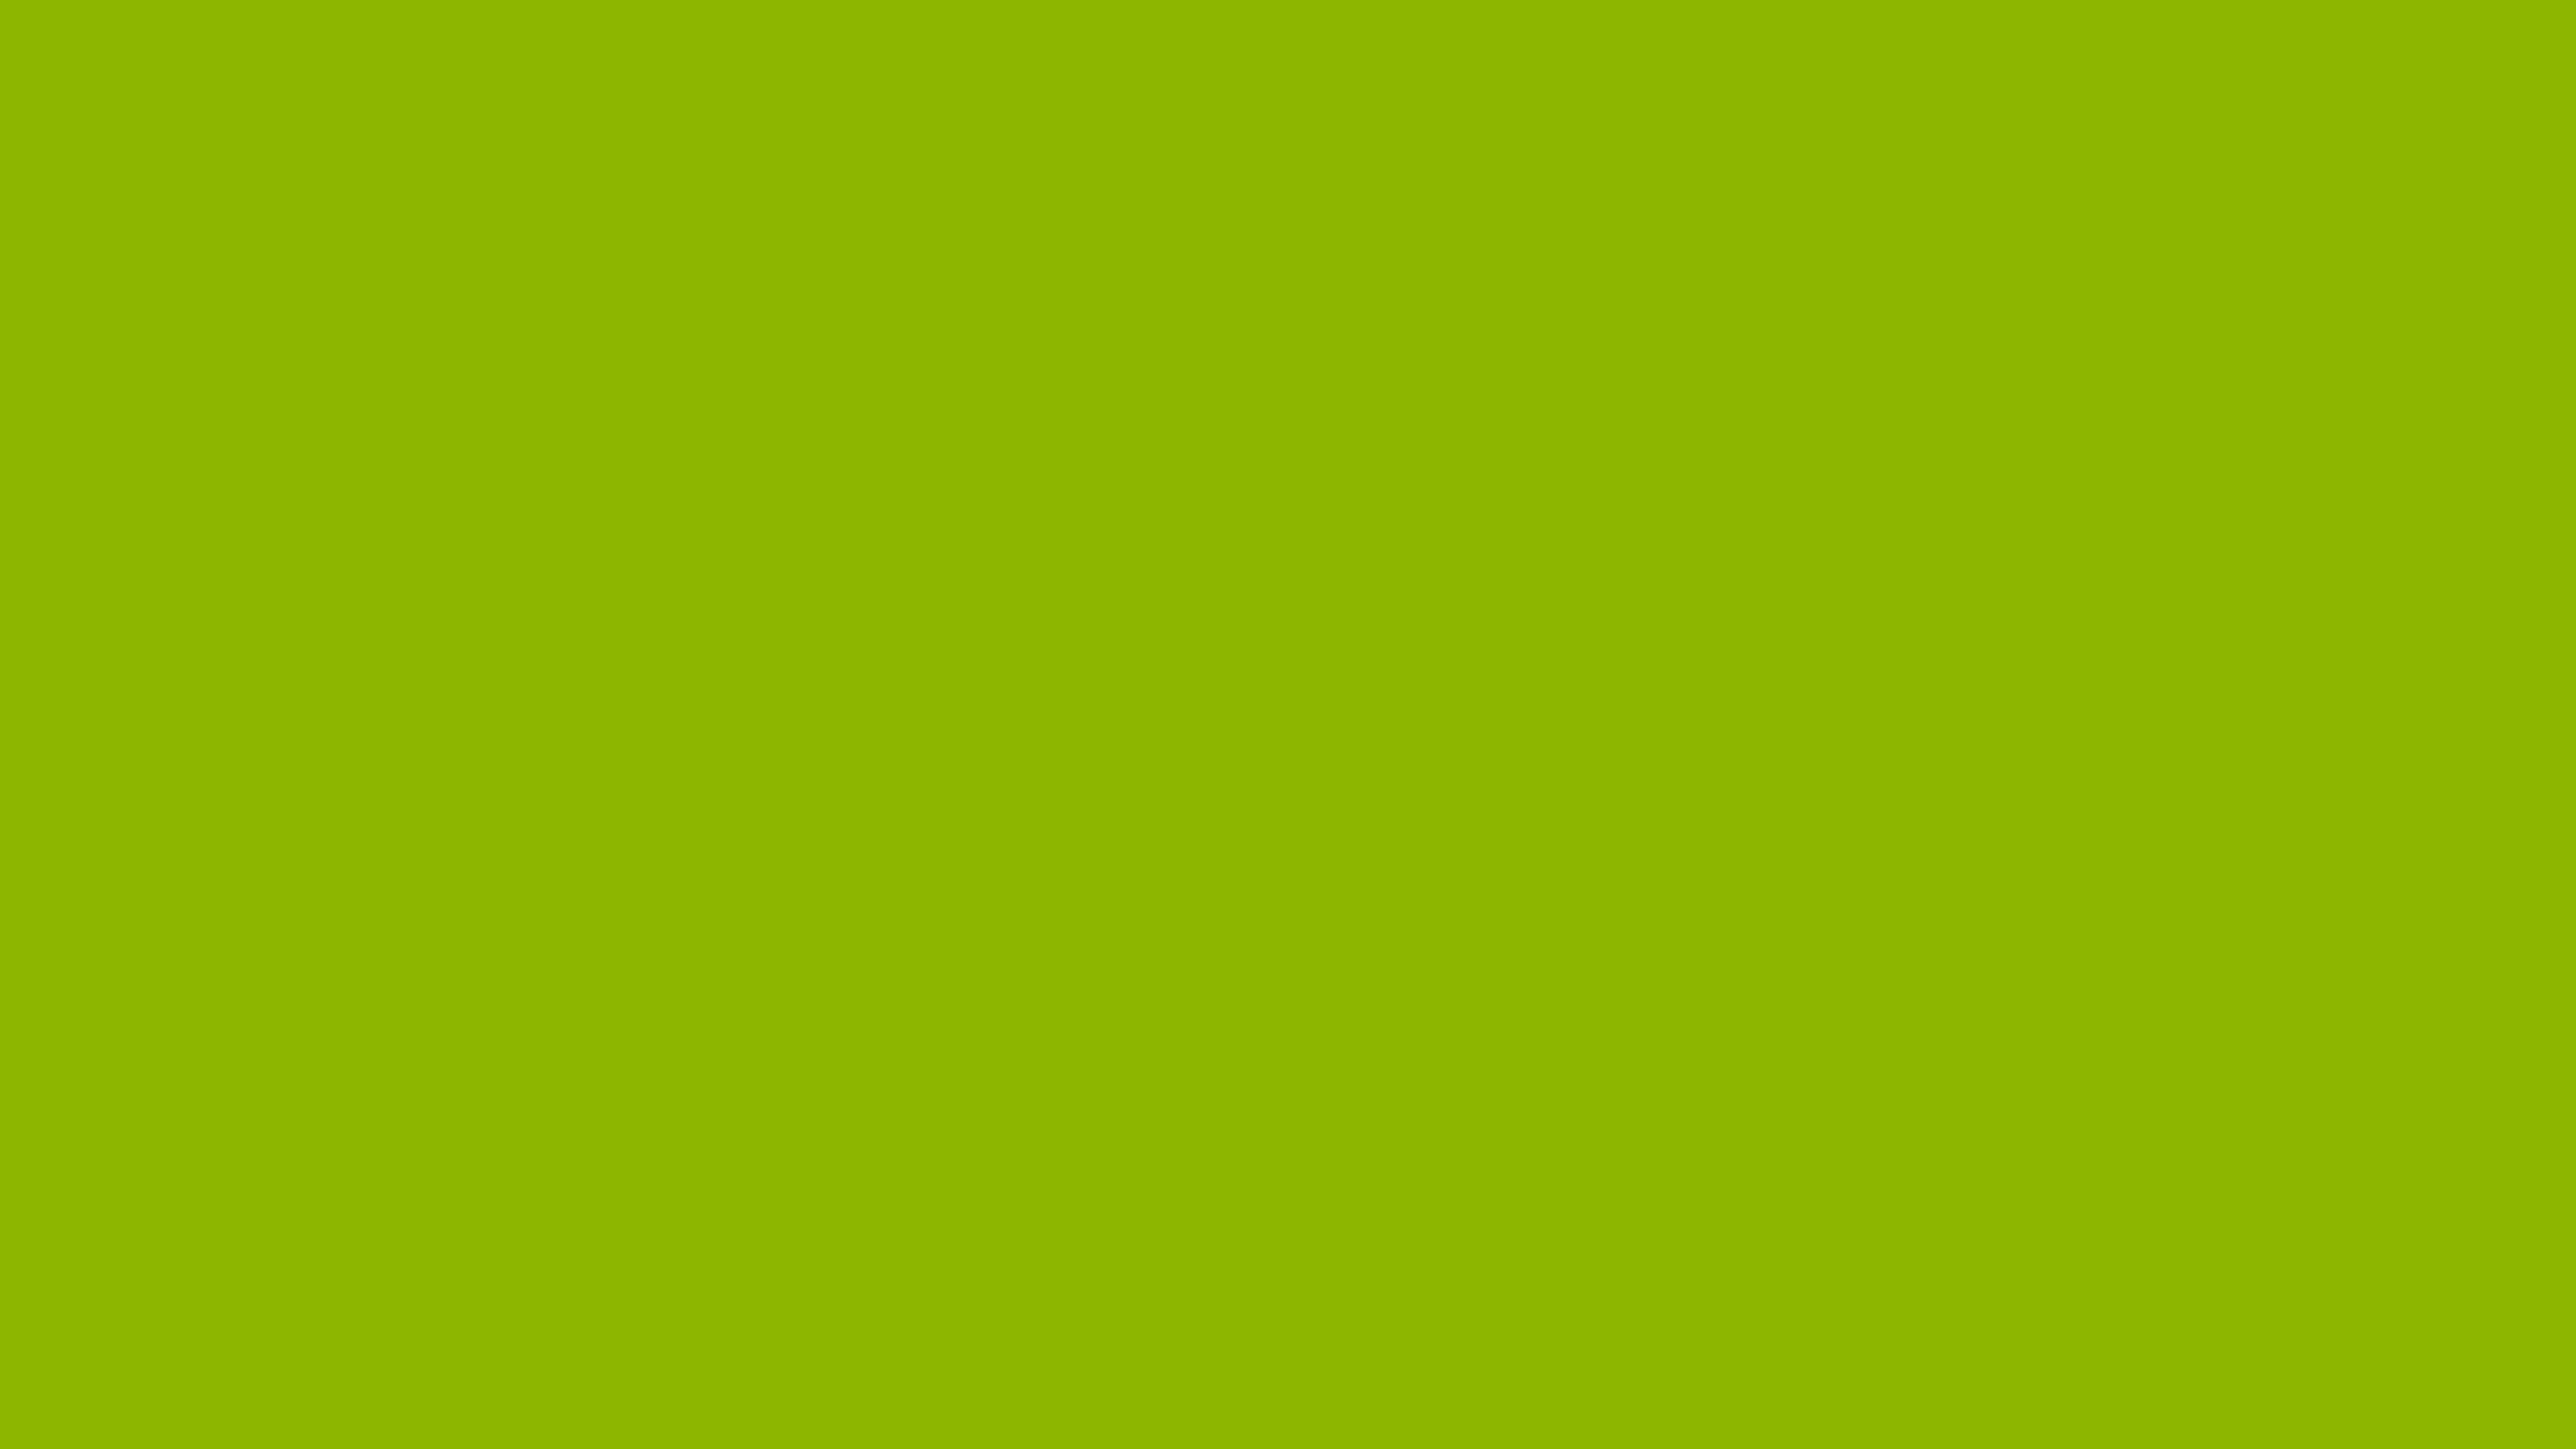 4096x2304 Apple Green Solid Color Background